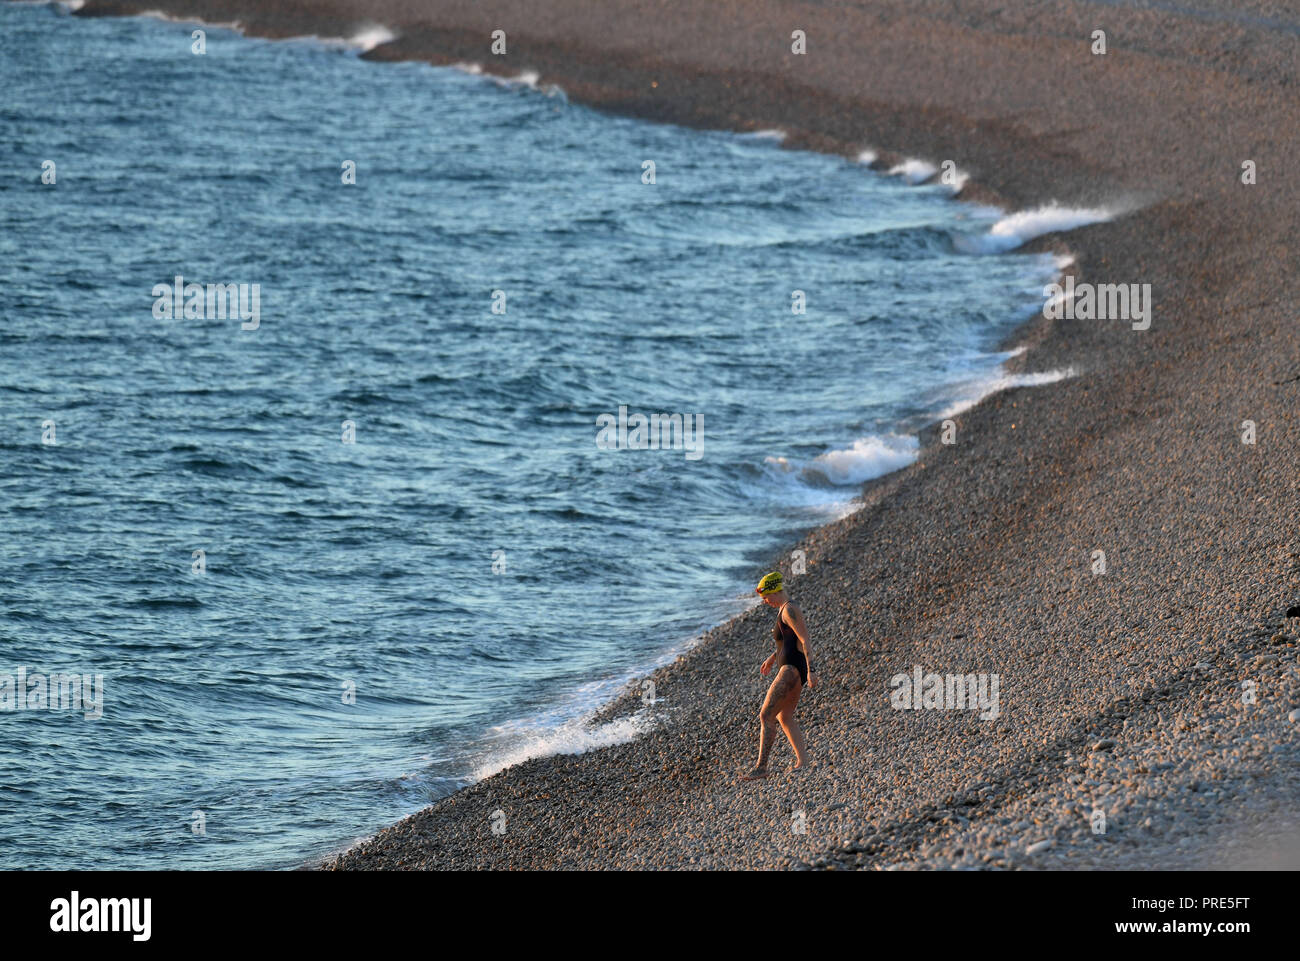 Portland, Dorset, UK. 1st Oct, 2018. Sun sets on Chesil Beach at Portland in Dorset. A swimmer takes to the water at sunset on Chesil beach, Portland, Dorset Credit: Finnbarr Webster/Alamy Live News Stock Photo